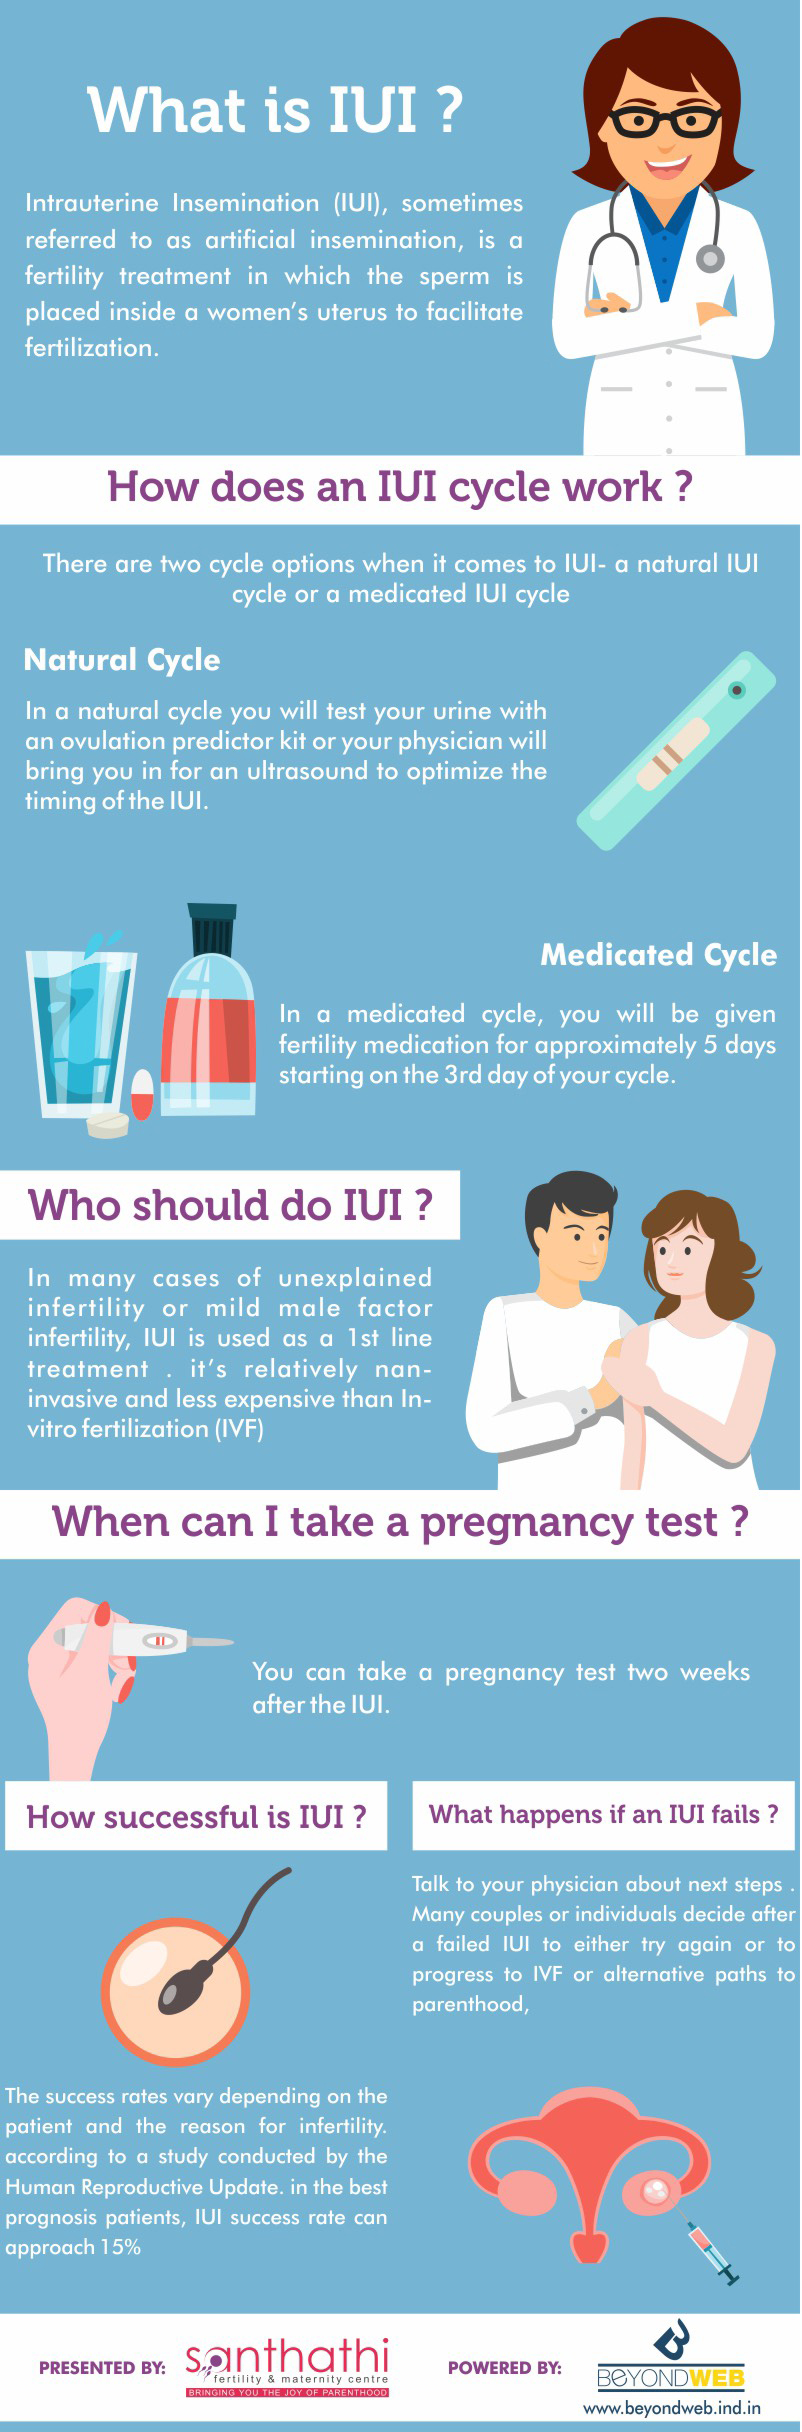 What is IUI